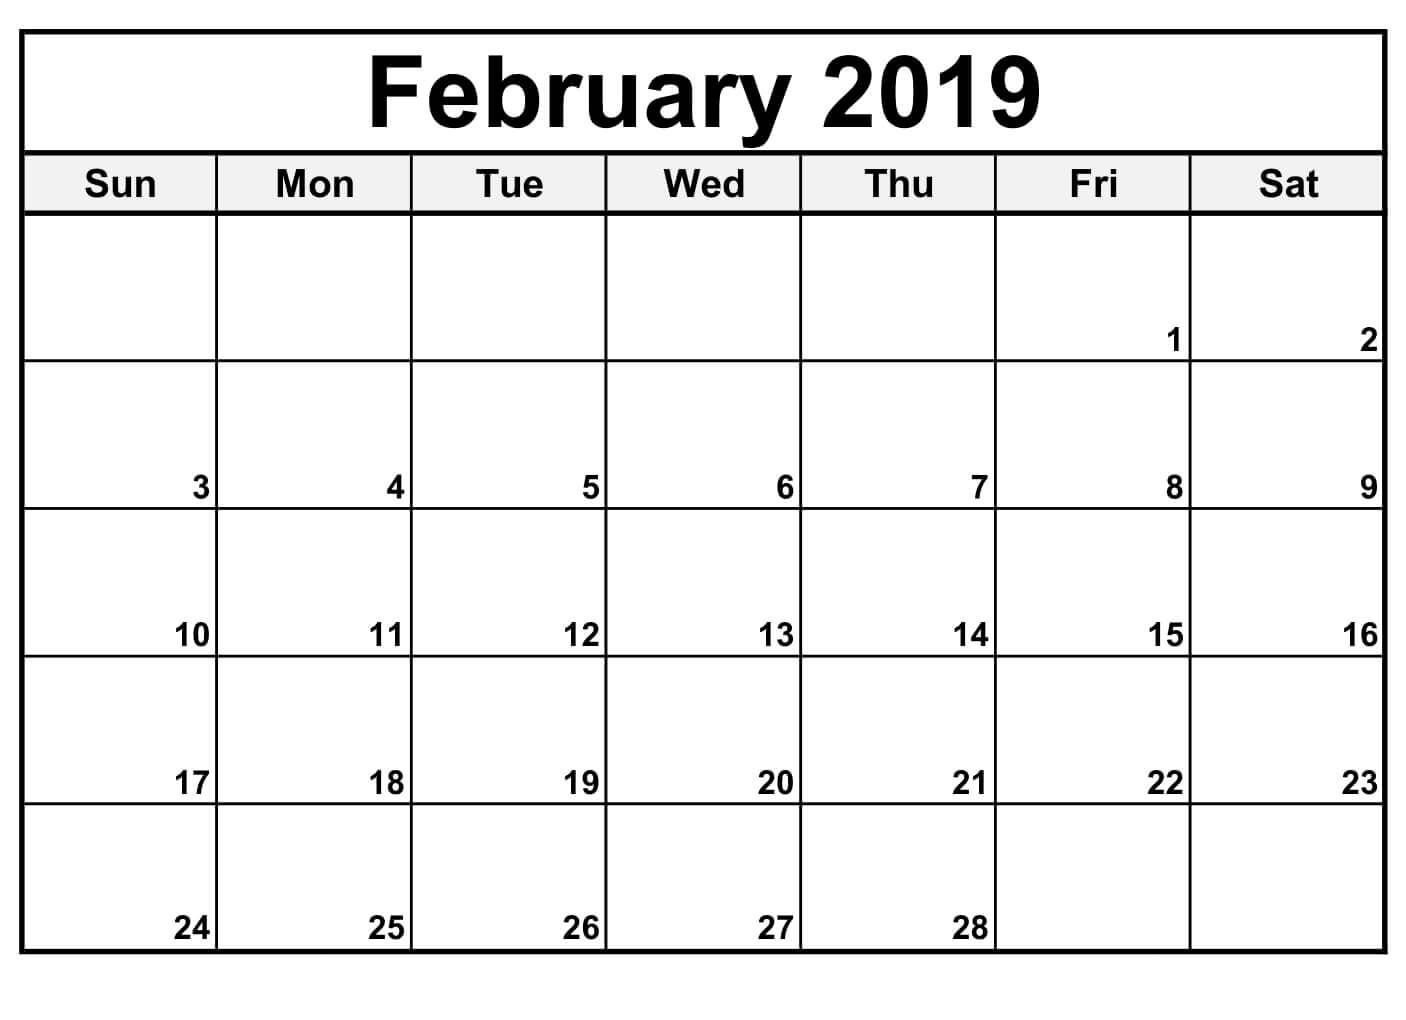 February 2019 Calendar Editable | Free Printable February 2019 Calendar Template To Fill In And Print